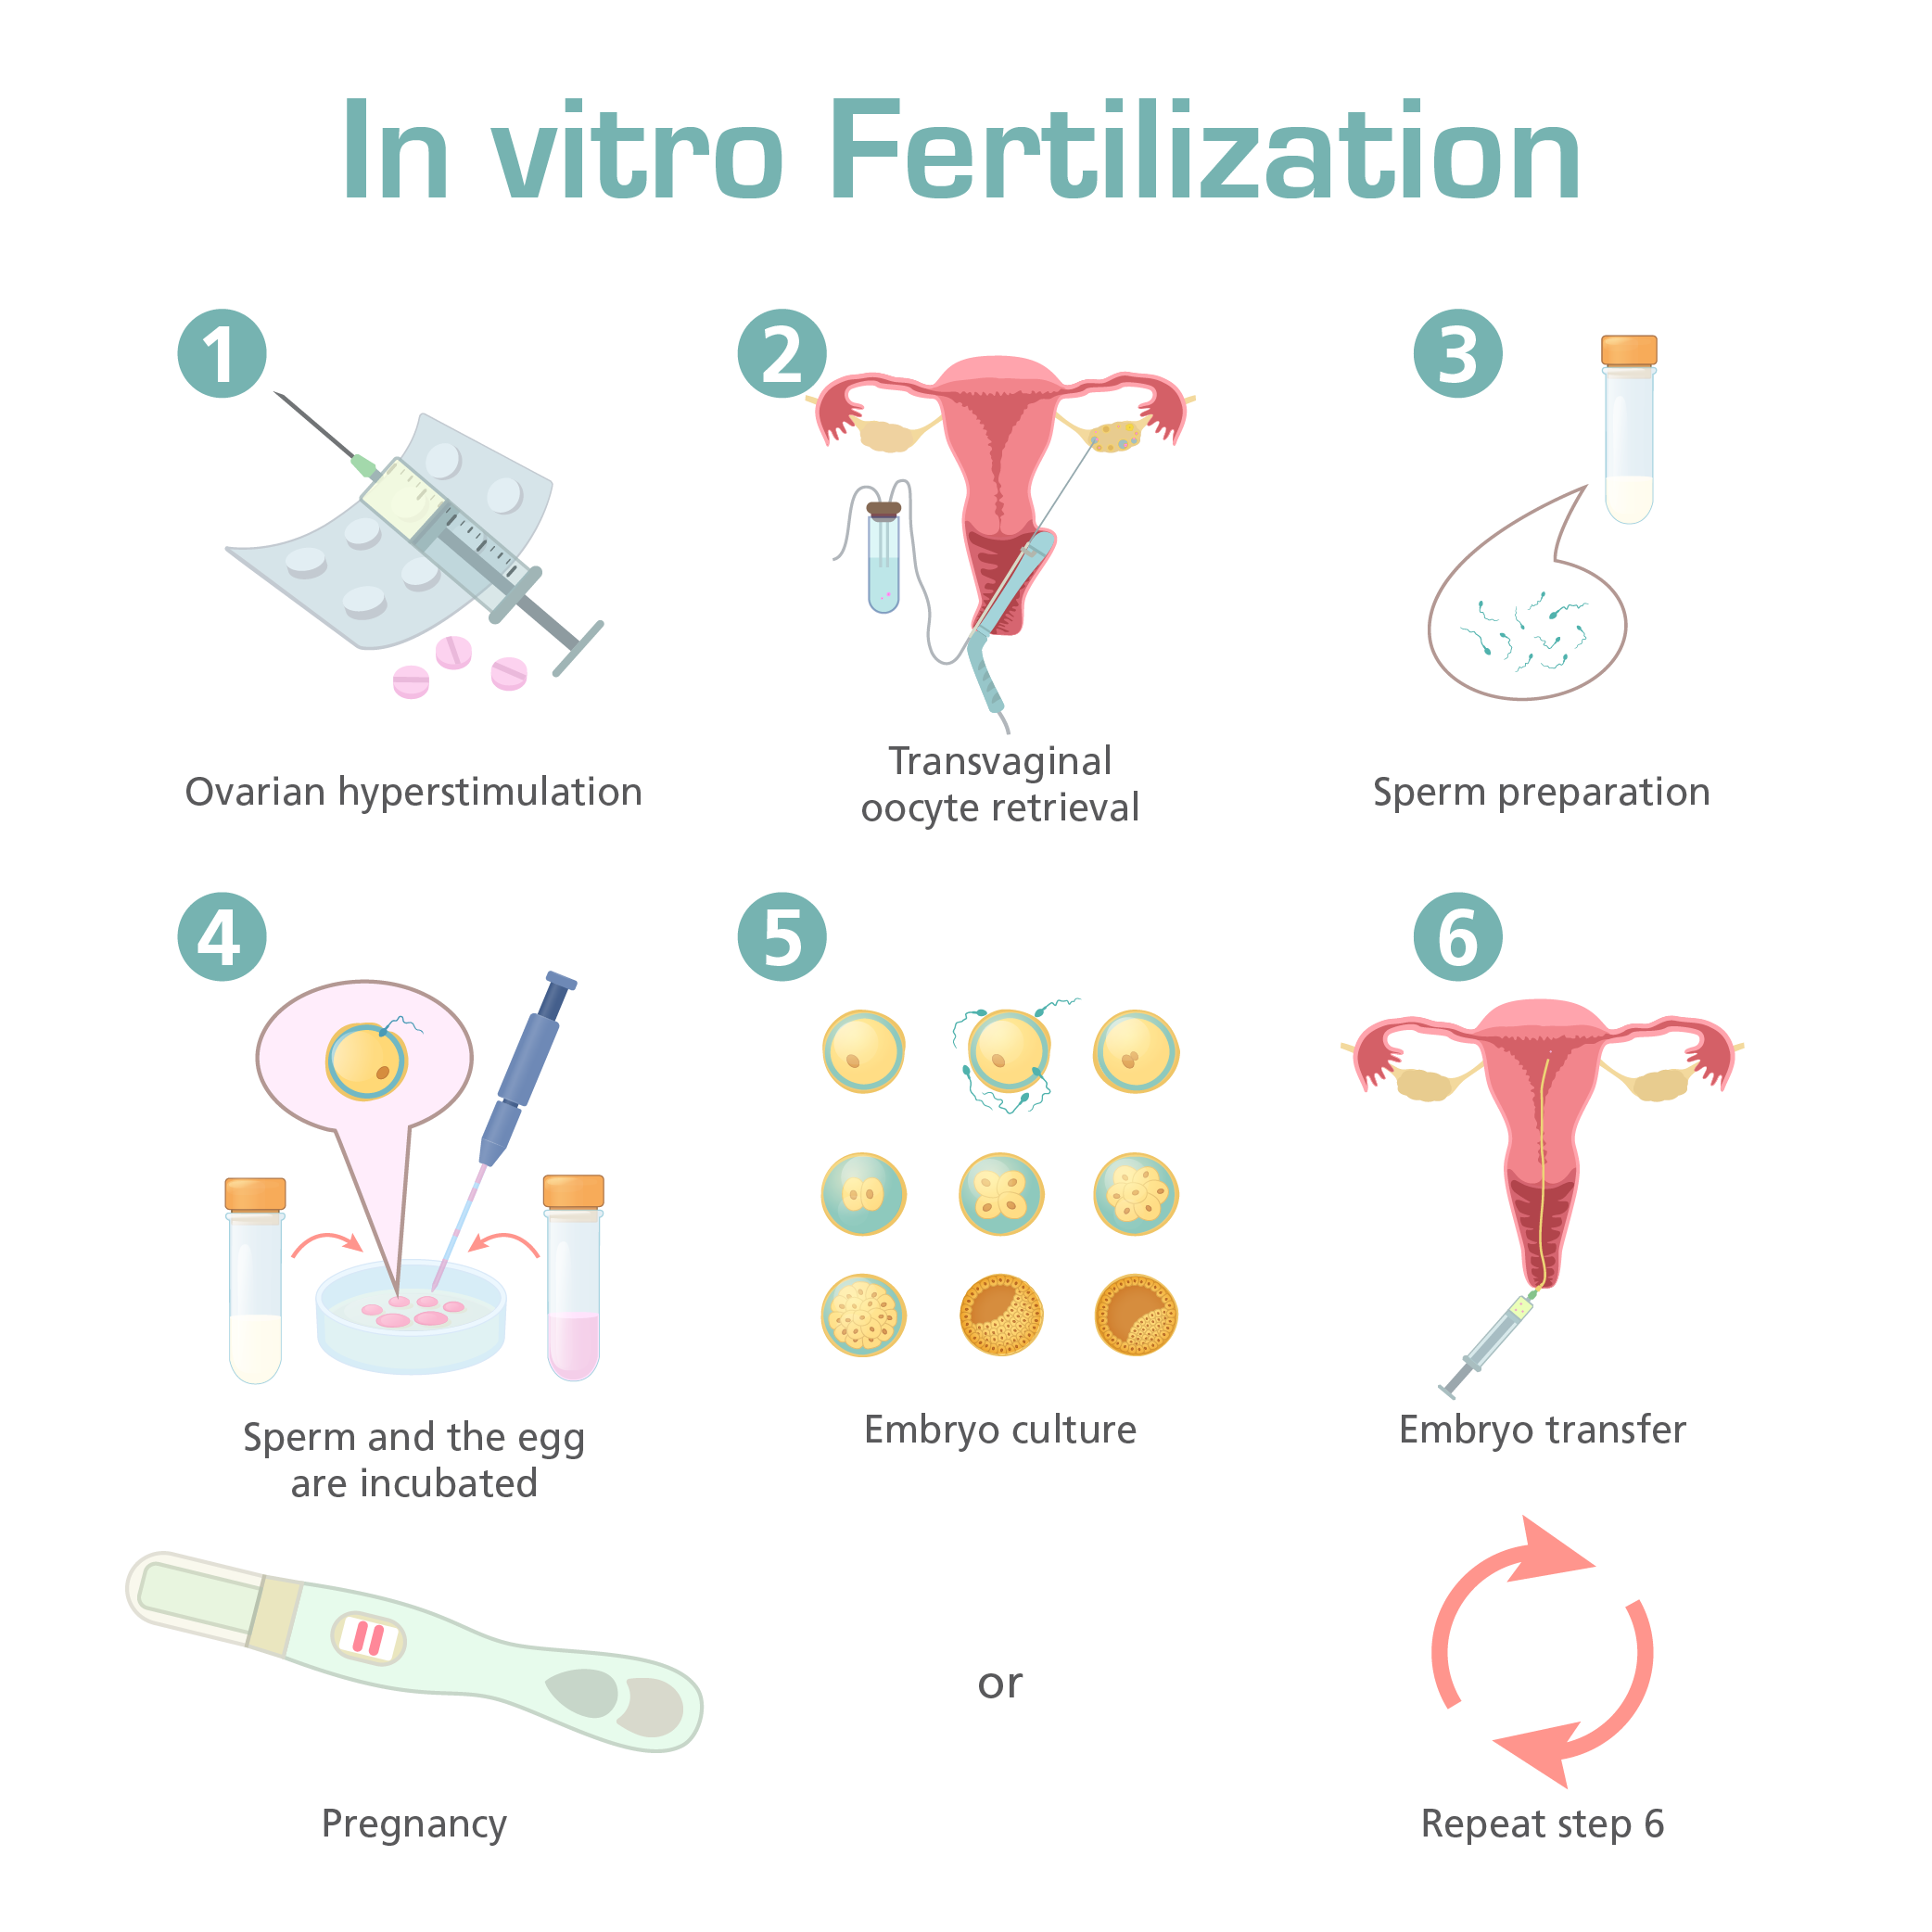 This multi-part figure shows the different steps in in vitro fertilization. The top panel shows how the oocytes and the sperm are collected and prepared (text reads: 1) Ovarian hyperstimulation, 2) Transvaginal oocyte retrieval, 3)Sperm preparation, 4) Sperm and the egg are incubated, 5) Embryo culture, 6) Embryo transfer, then the last panel shows either pregnancy or the process is repeated.